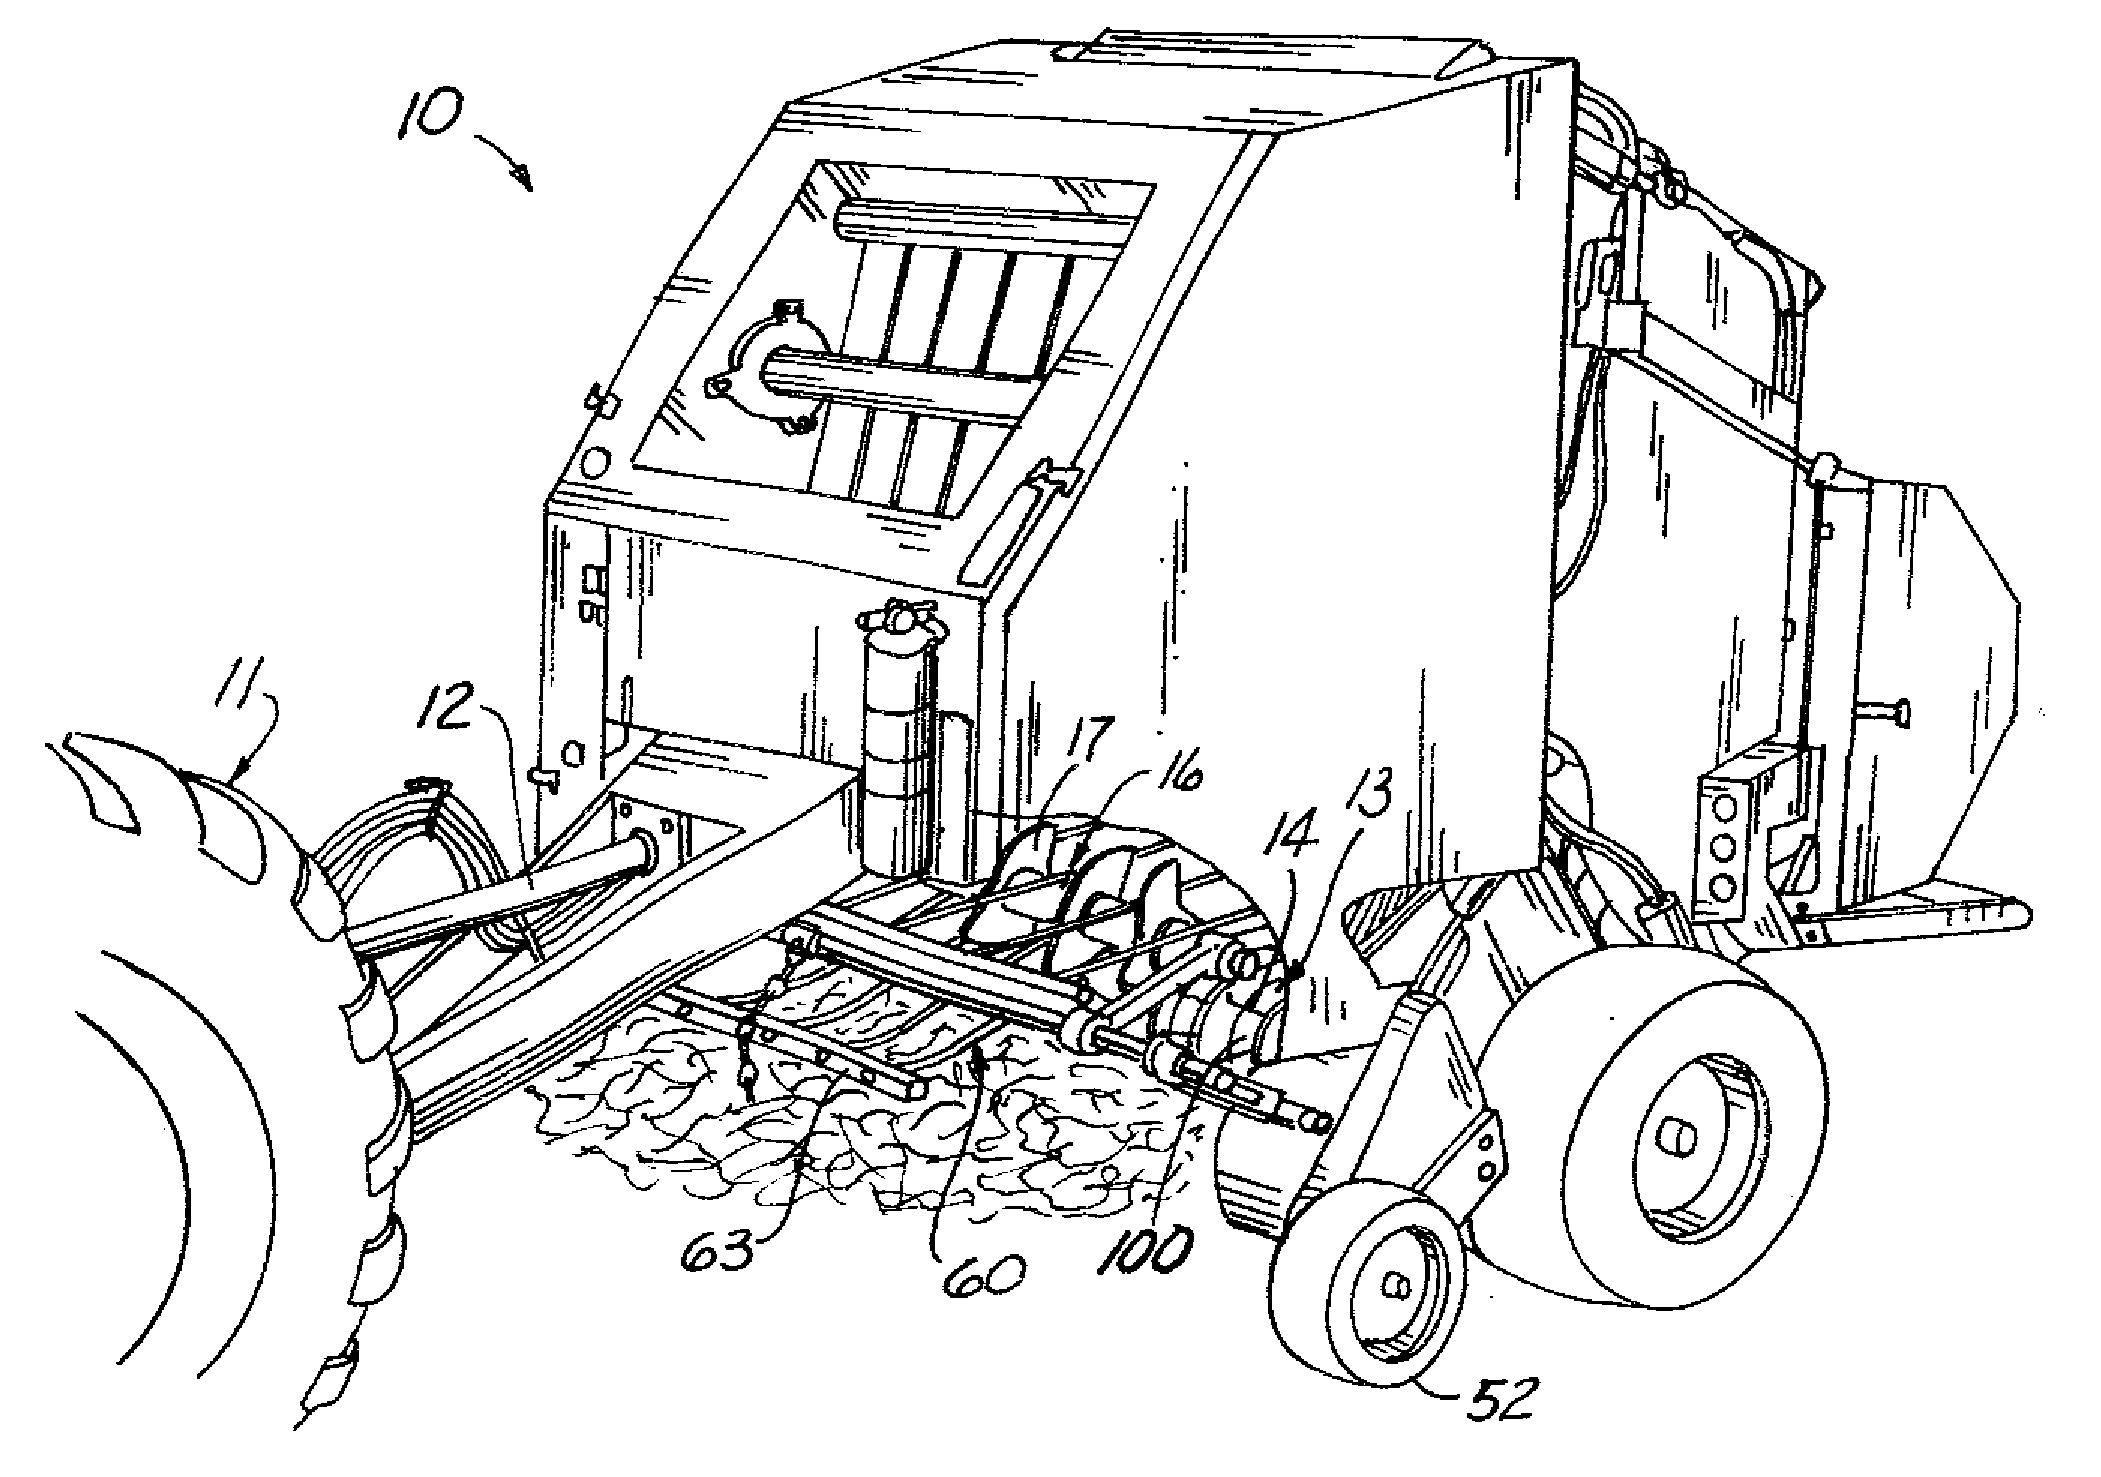 Plastic Bands or Plastic Covers for Bands Located Between Tines on a Crop Pickup Apparatus